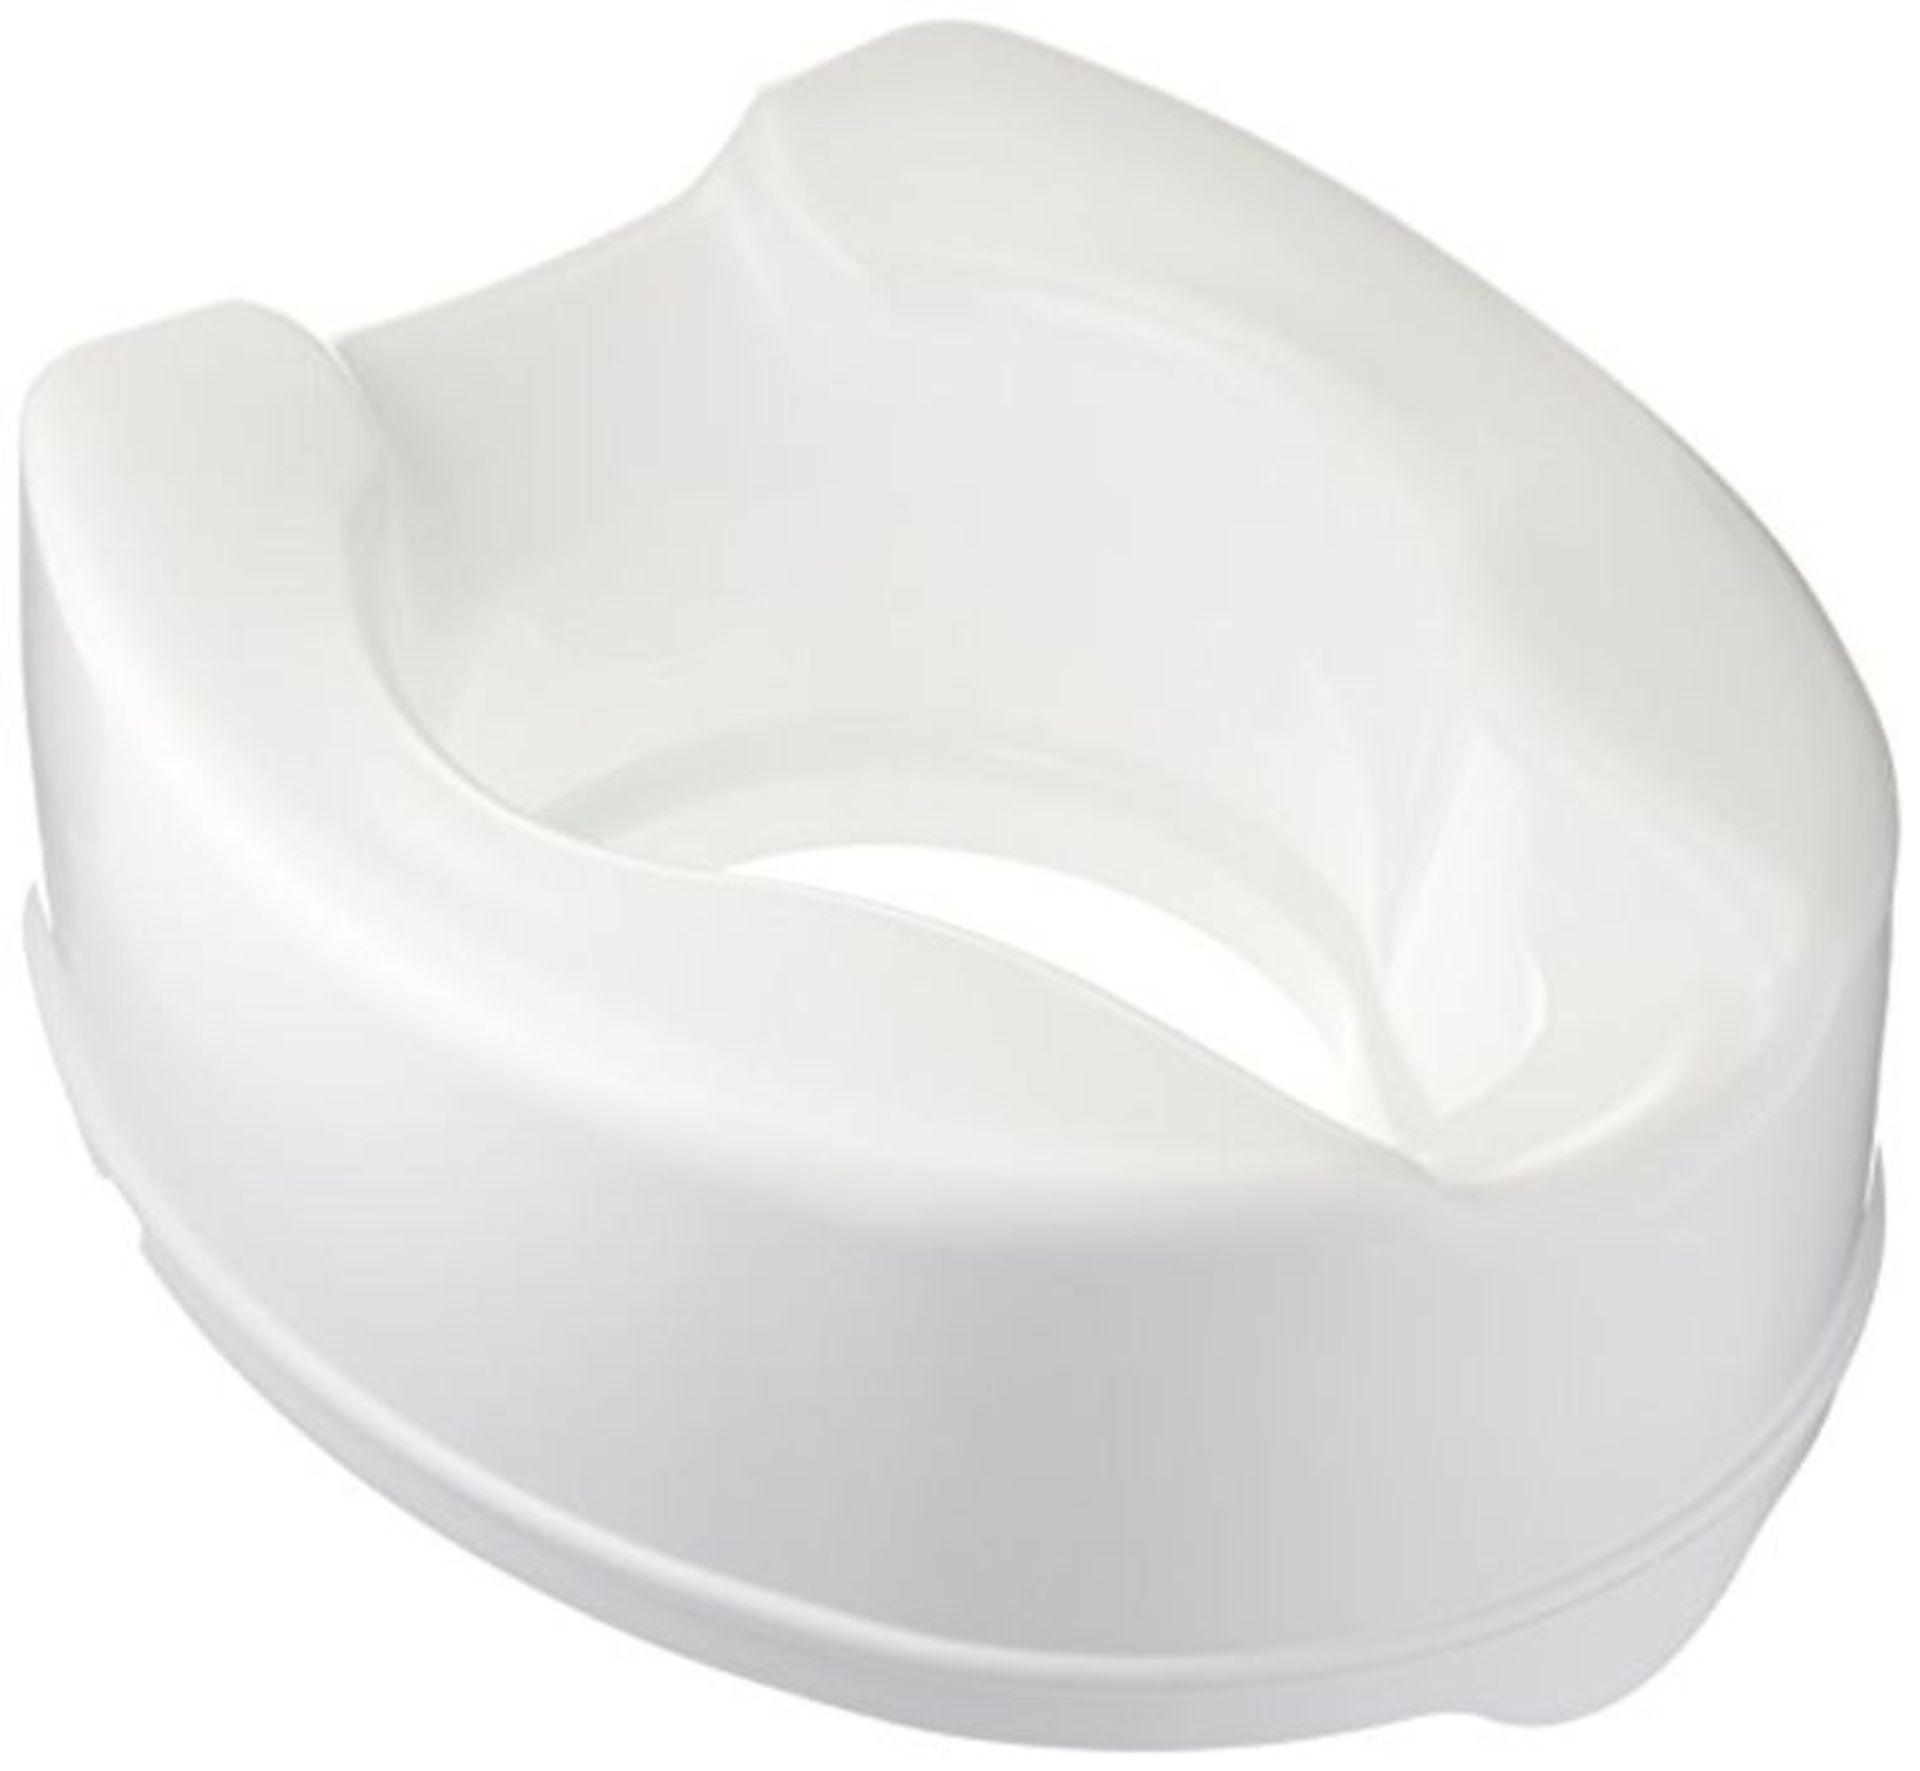 Homecraft Savanah Raised Toilet Seat without Lid, Elongated & Elevated Lock Seat Suppo